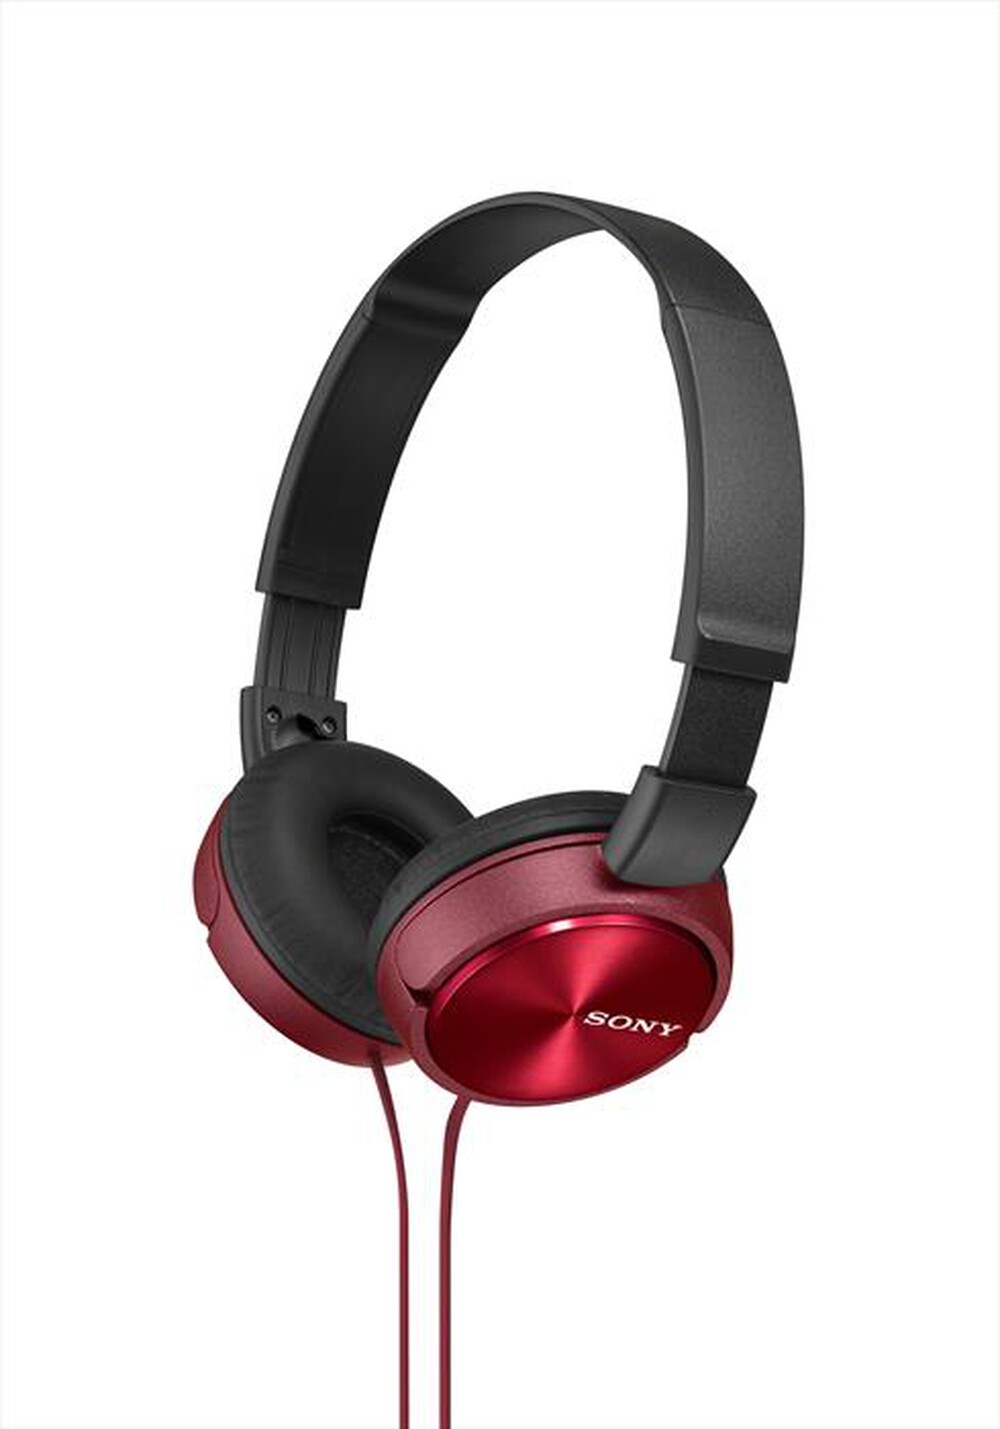 "SONY - MDRZX310R.AE - ROSSO"